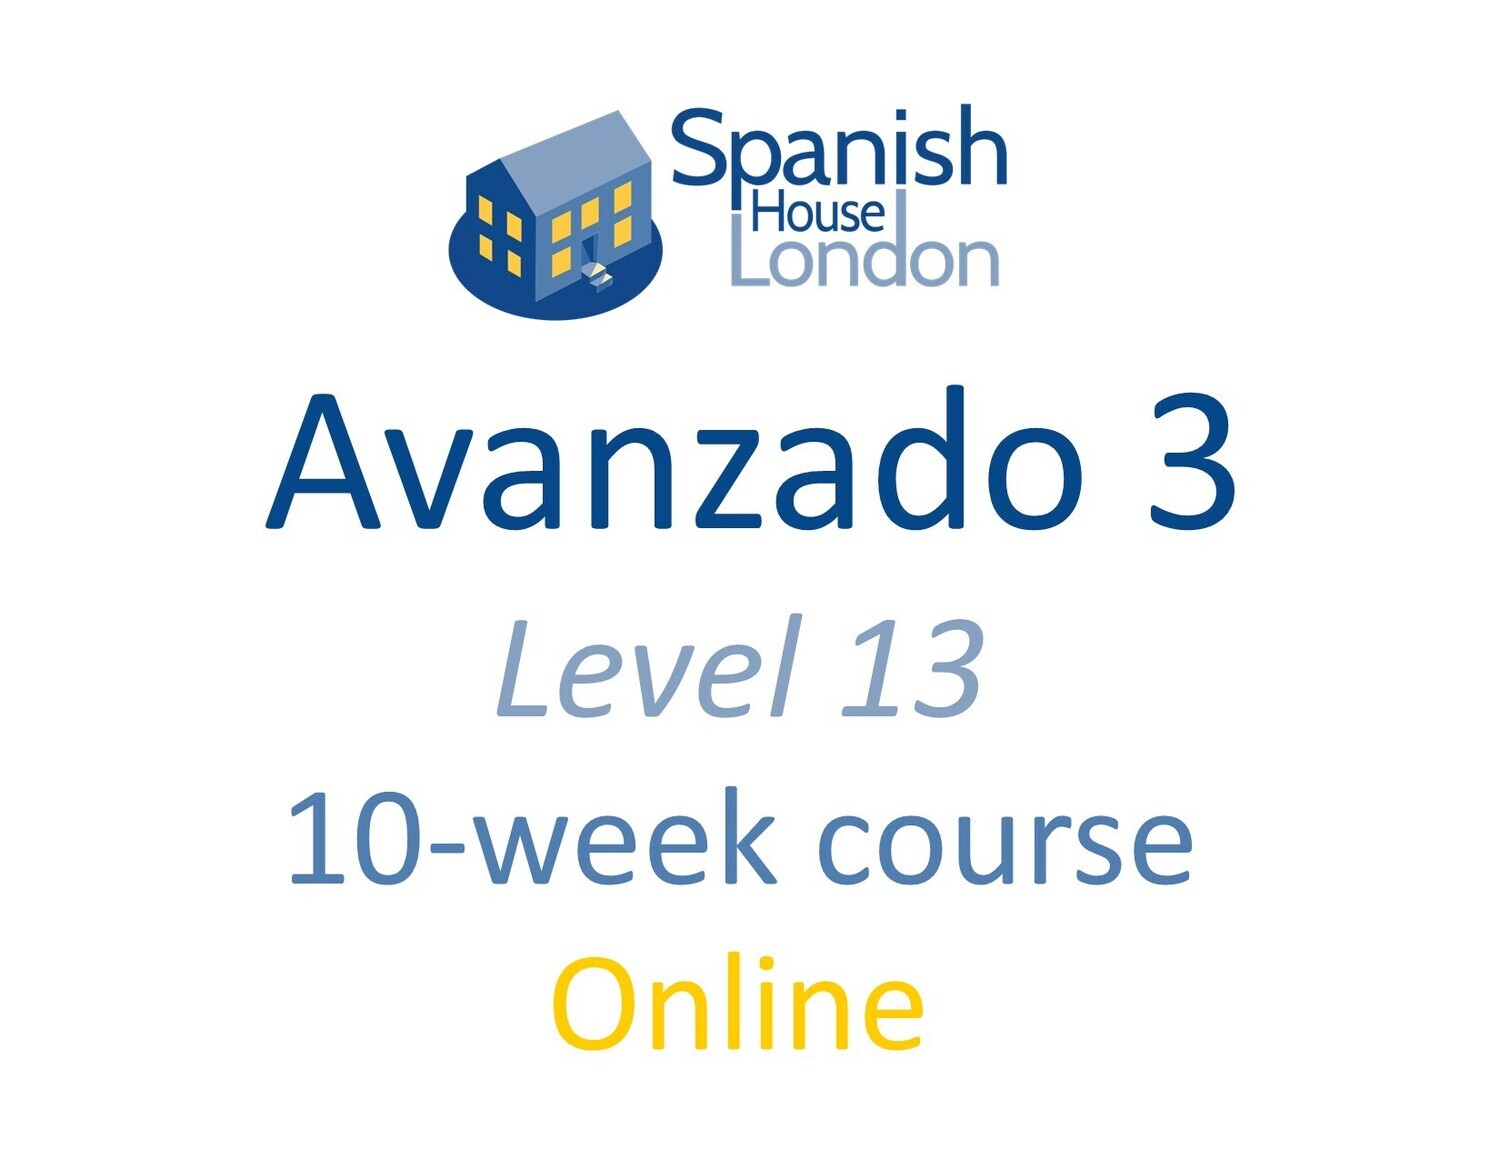 Avanzado 3 Course starting on 9th January at 7.30pm